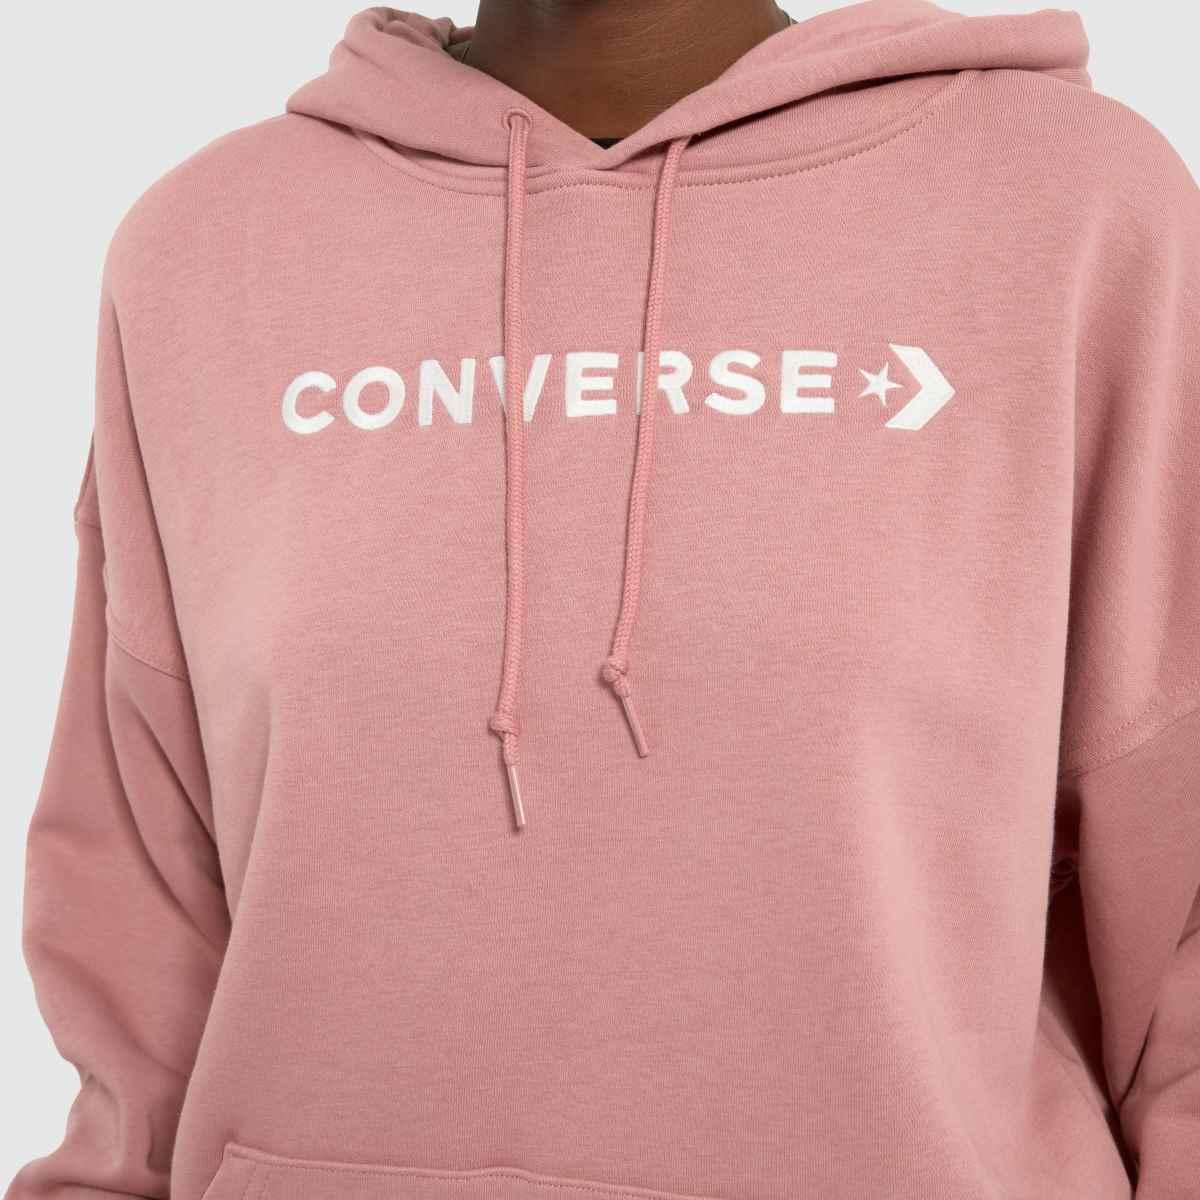 Converse Embroidered Fleece Hoodie UK Pink | Lyst In in